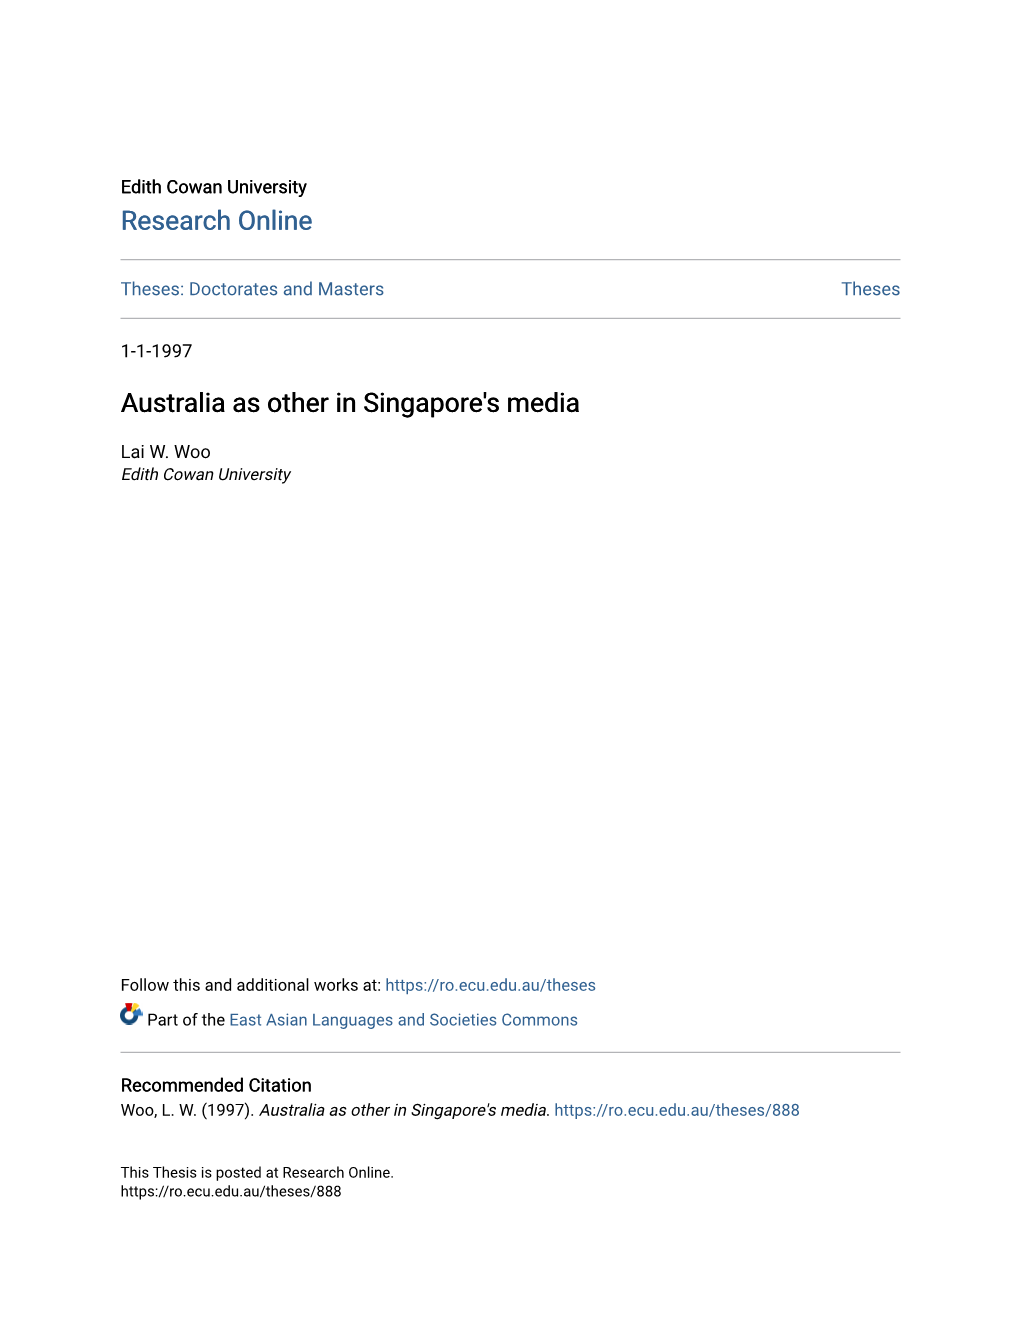 Australia As Other in Singapore's Media